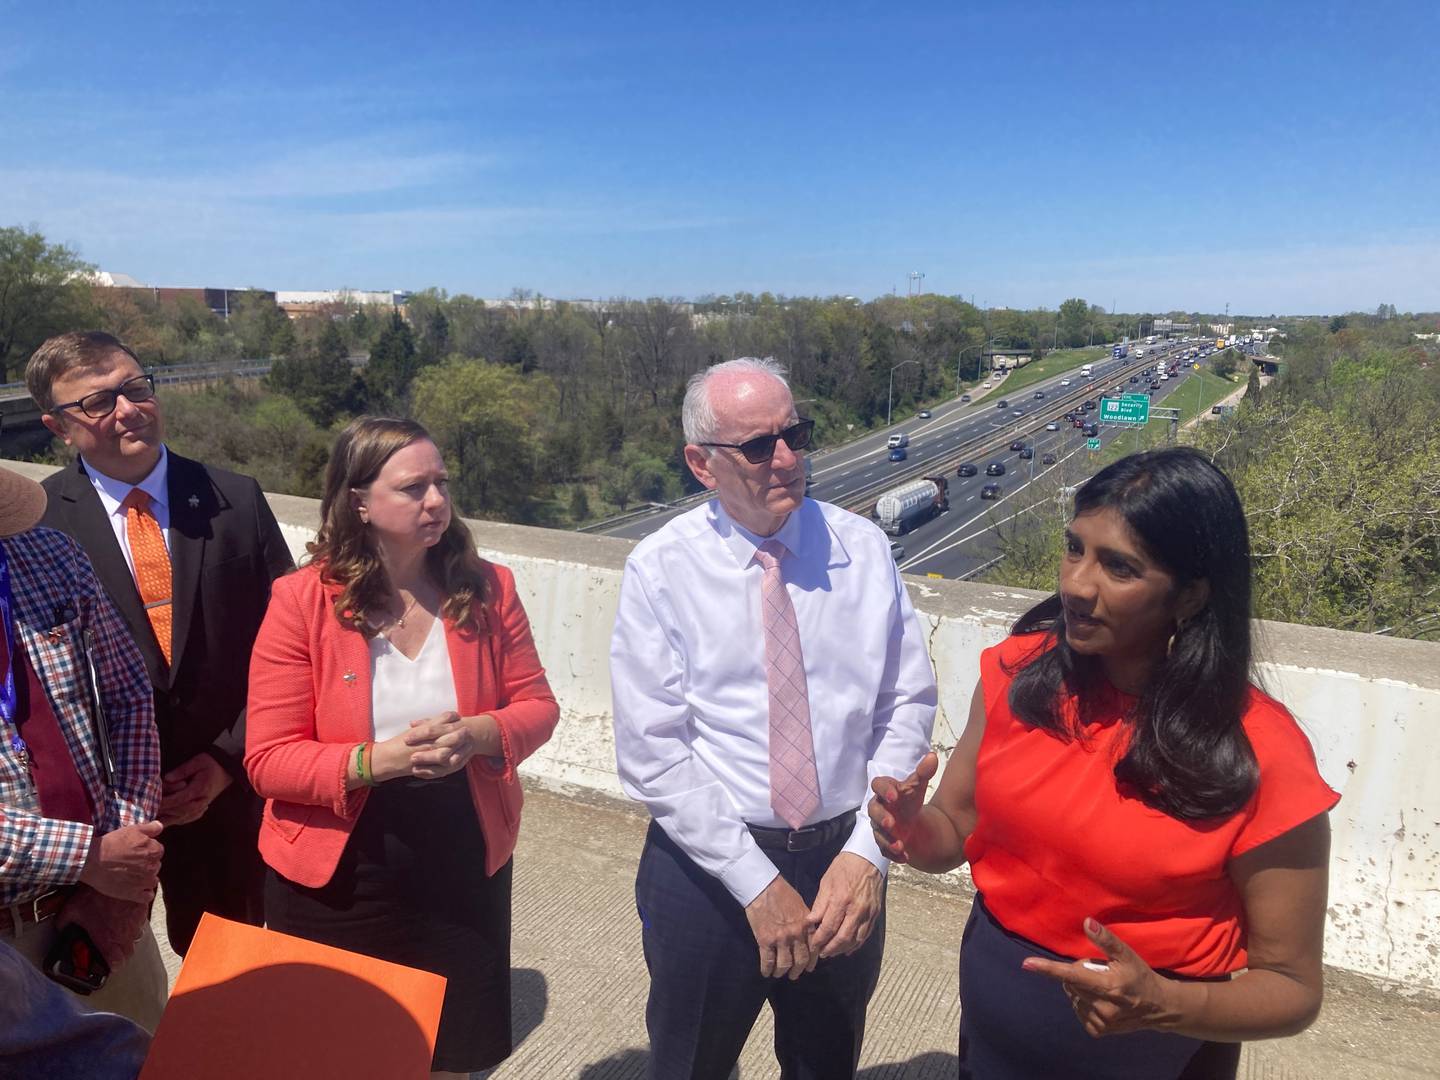 Four people stand and talk on a highway overpass with a large highway in the background.